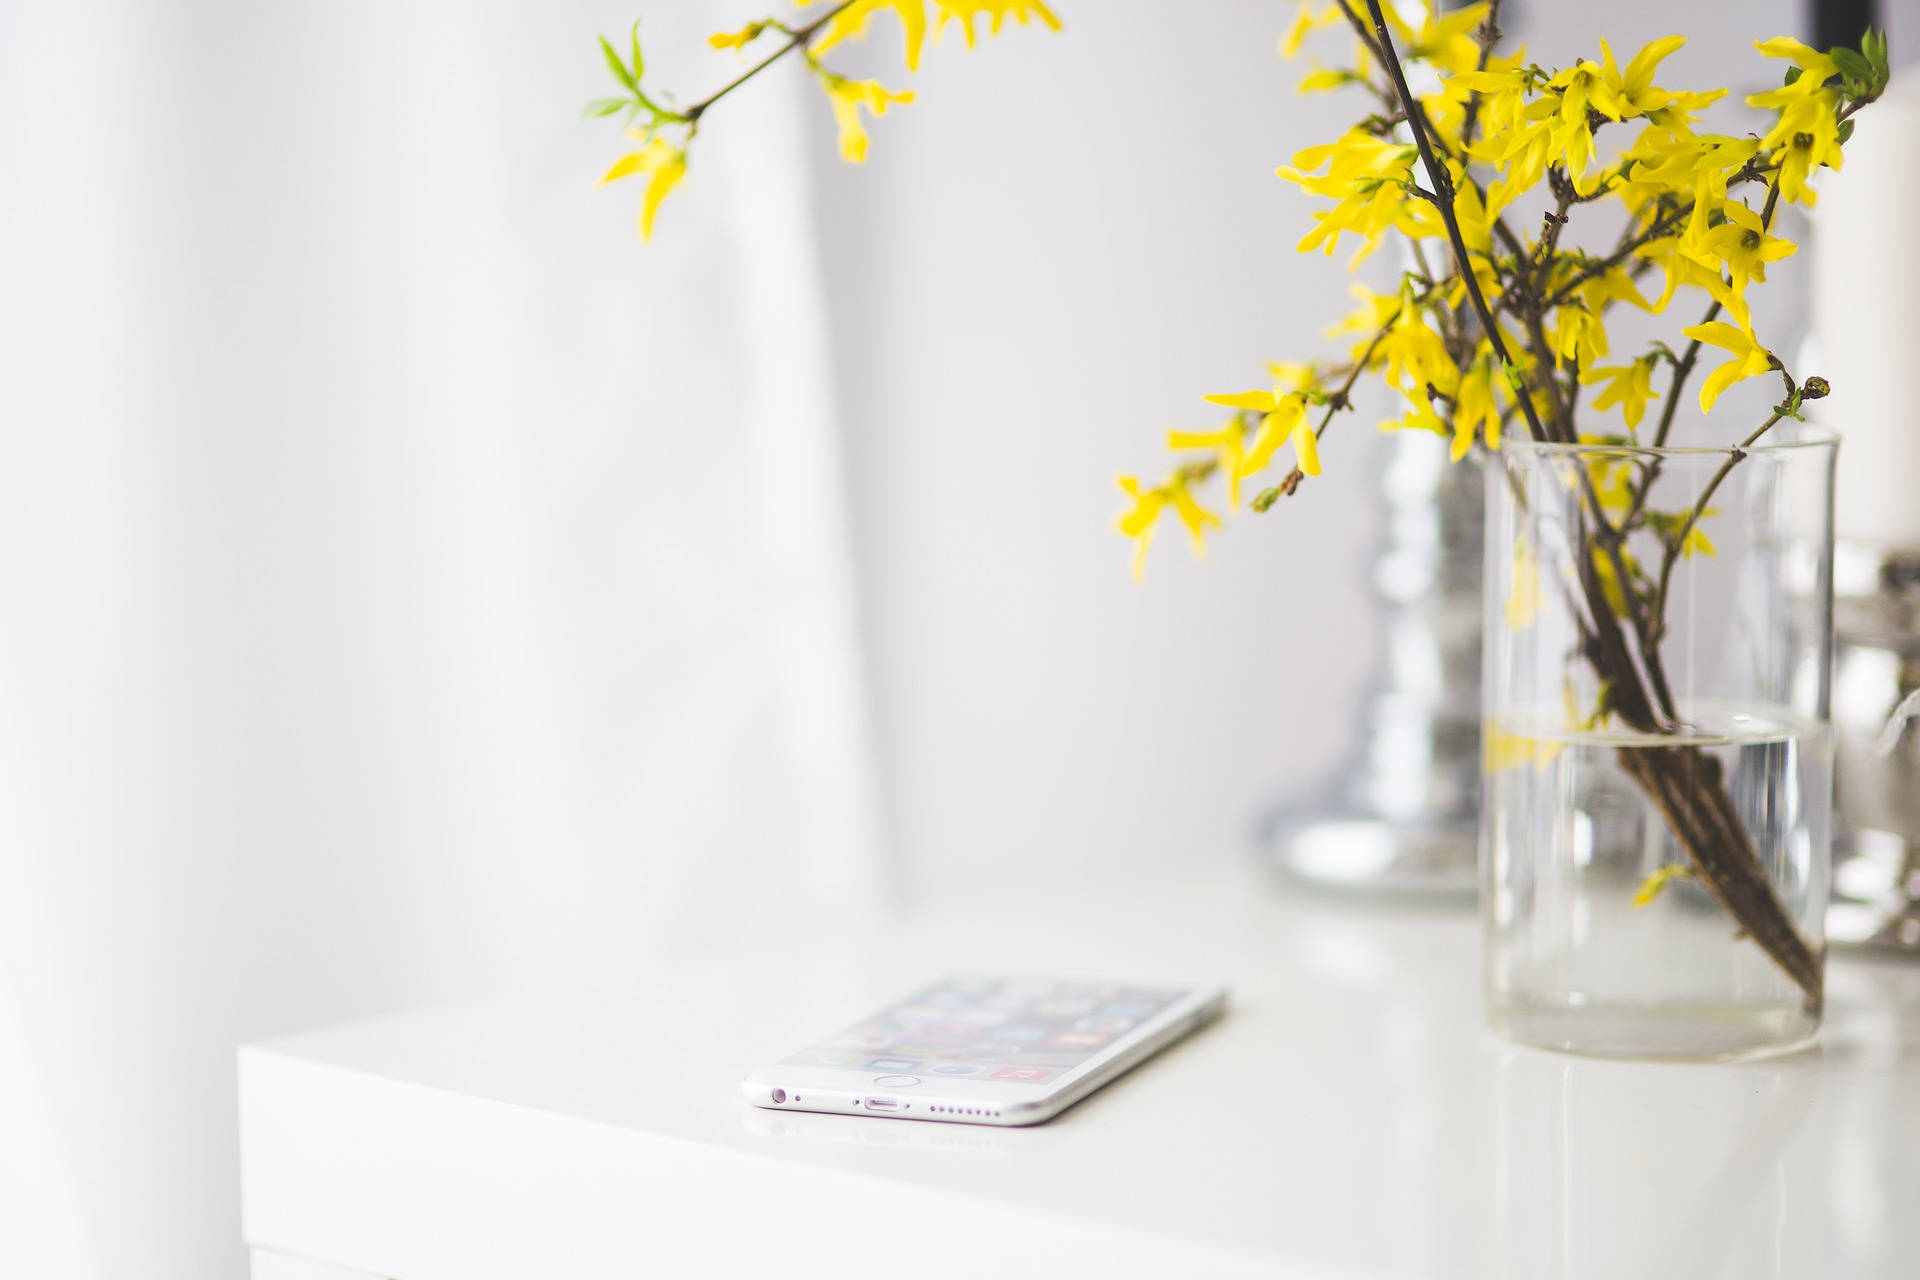 Mobile Phone Beside Yellow Flowers Background